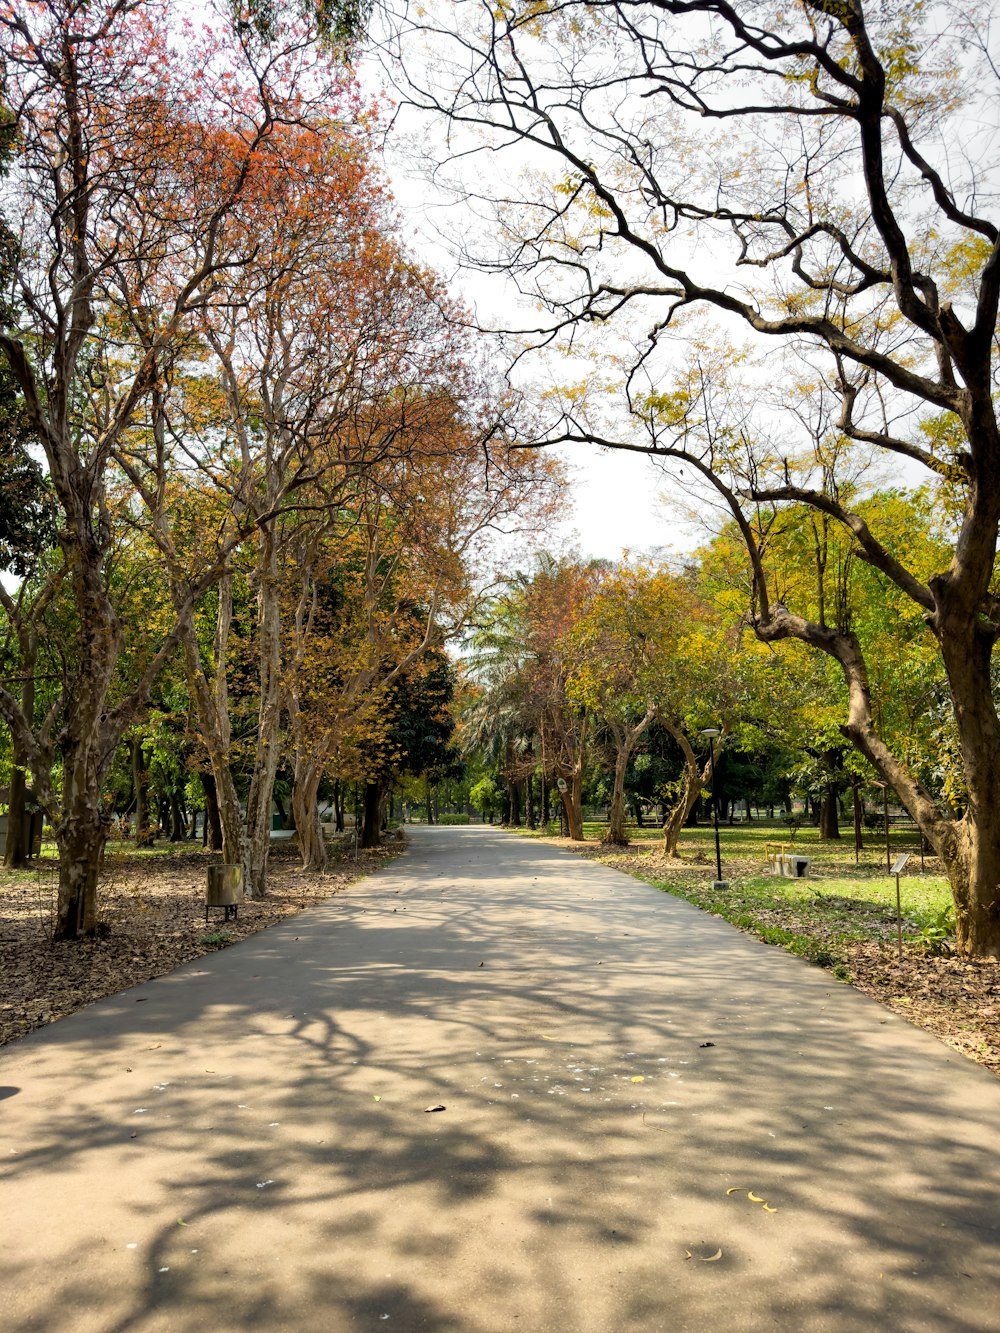 a park with trees and a paved path